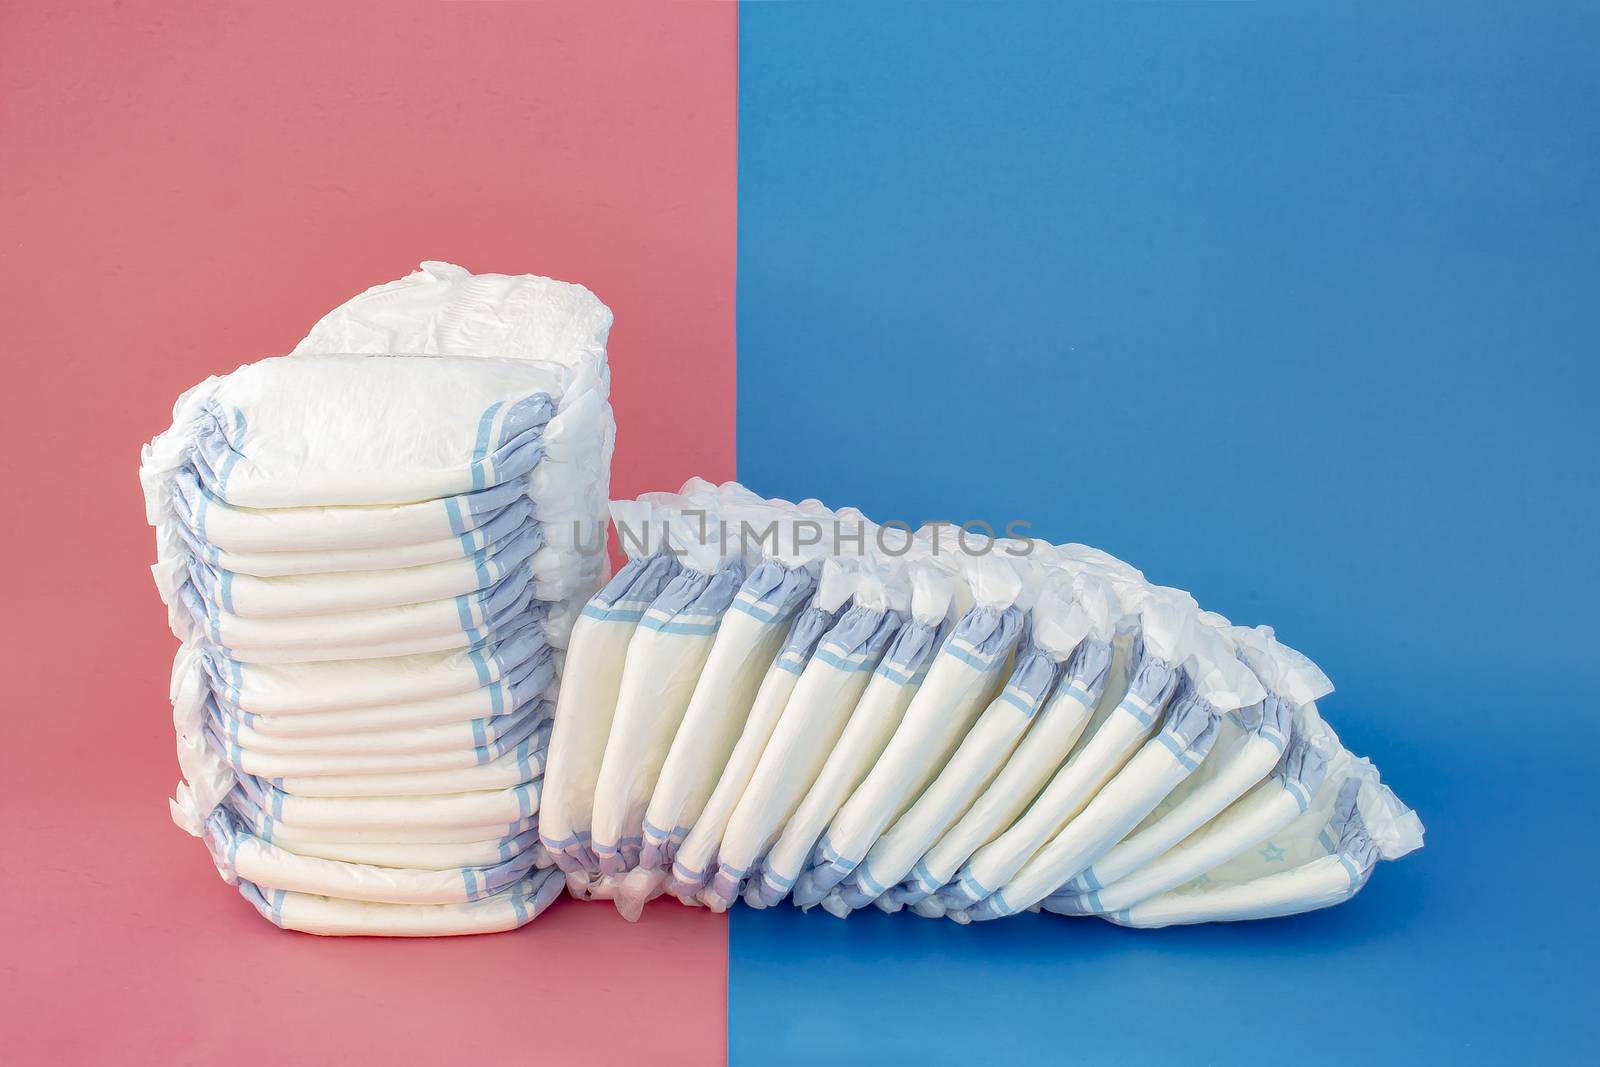 Diapers stack with some diapers falling on the right side on a blue and pink background by oasisamuel